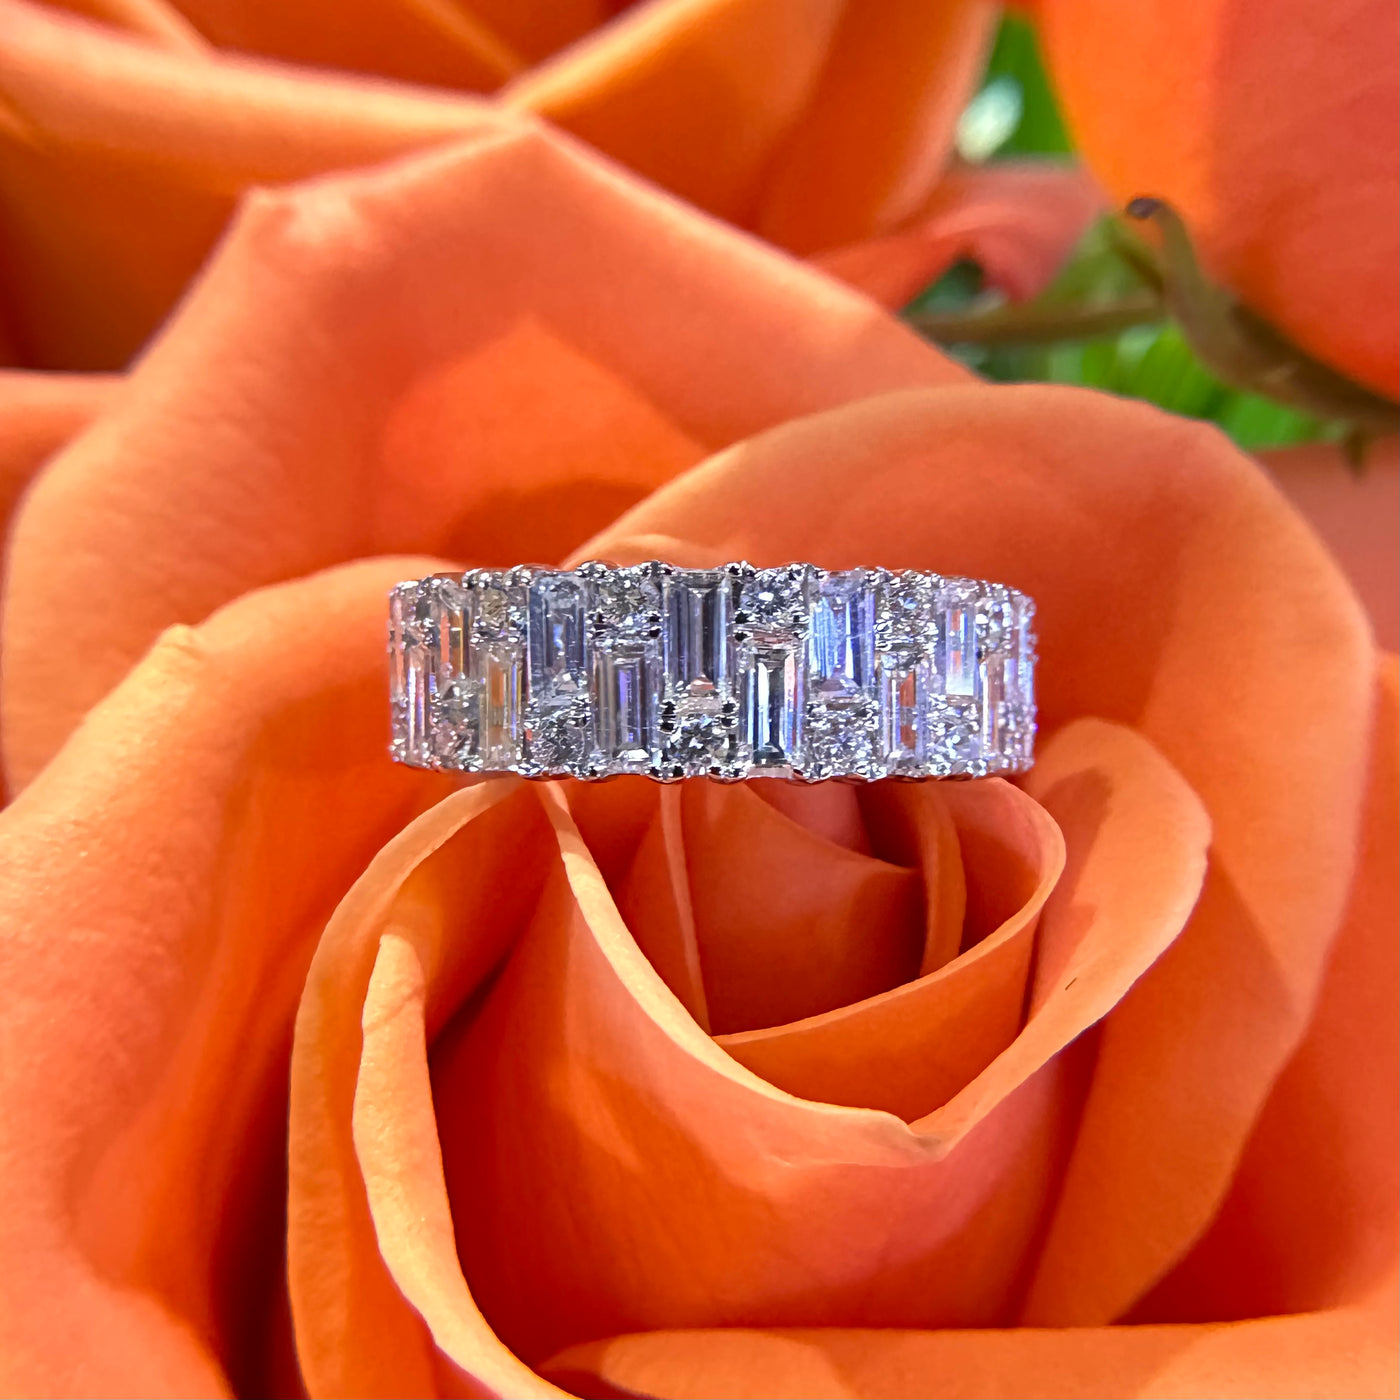 Apparel & Accessories > Jewelry > Rings Round and Baguette Bold Diamond Band 14K White Gold Ring Pierce Custom Jewelers